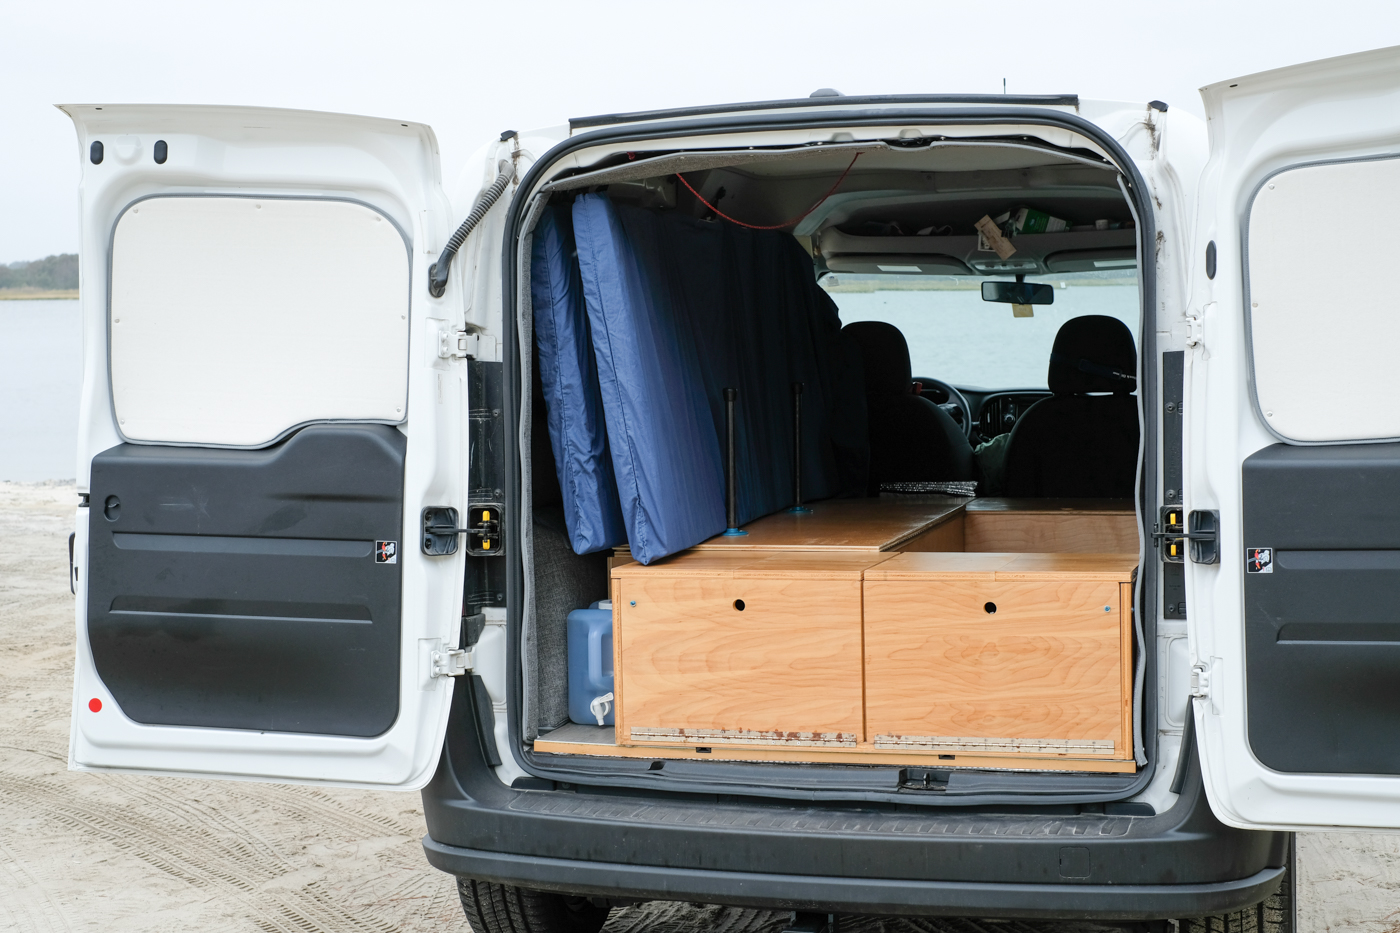 The back of a Ram Promaster City with a Wayfarer Camper Van Conversion Kit and a DIY Bed